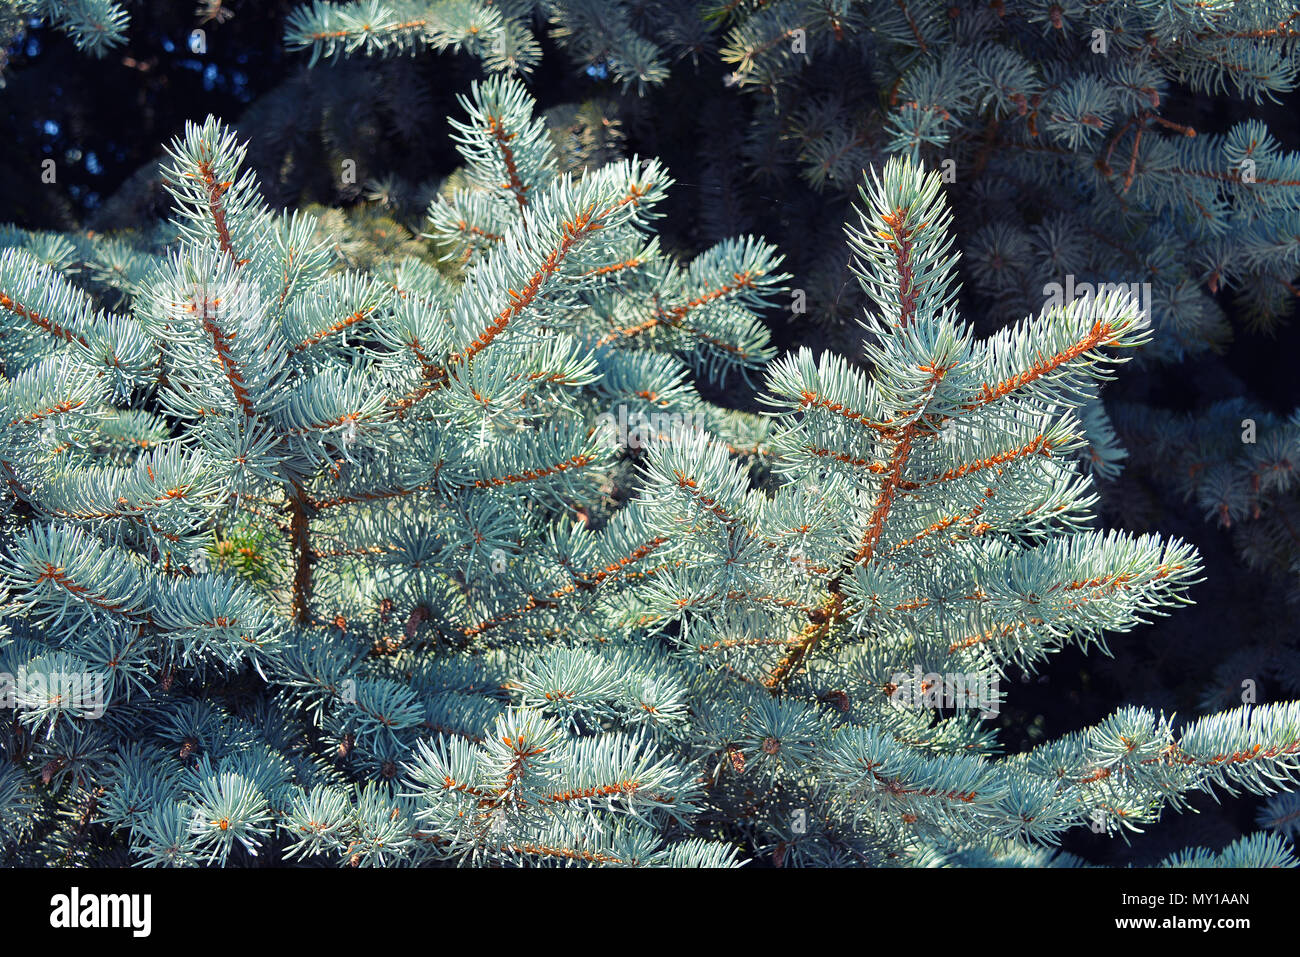 Blue spruce in the forest Stock Photo